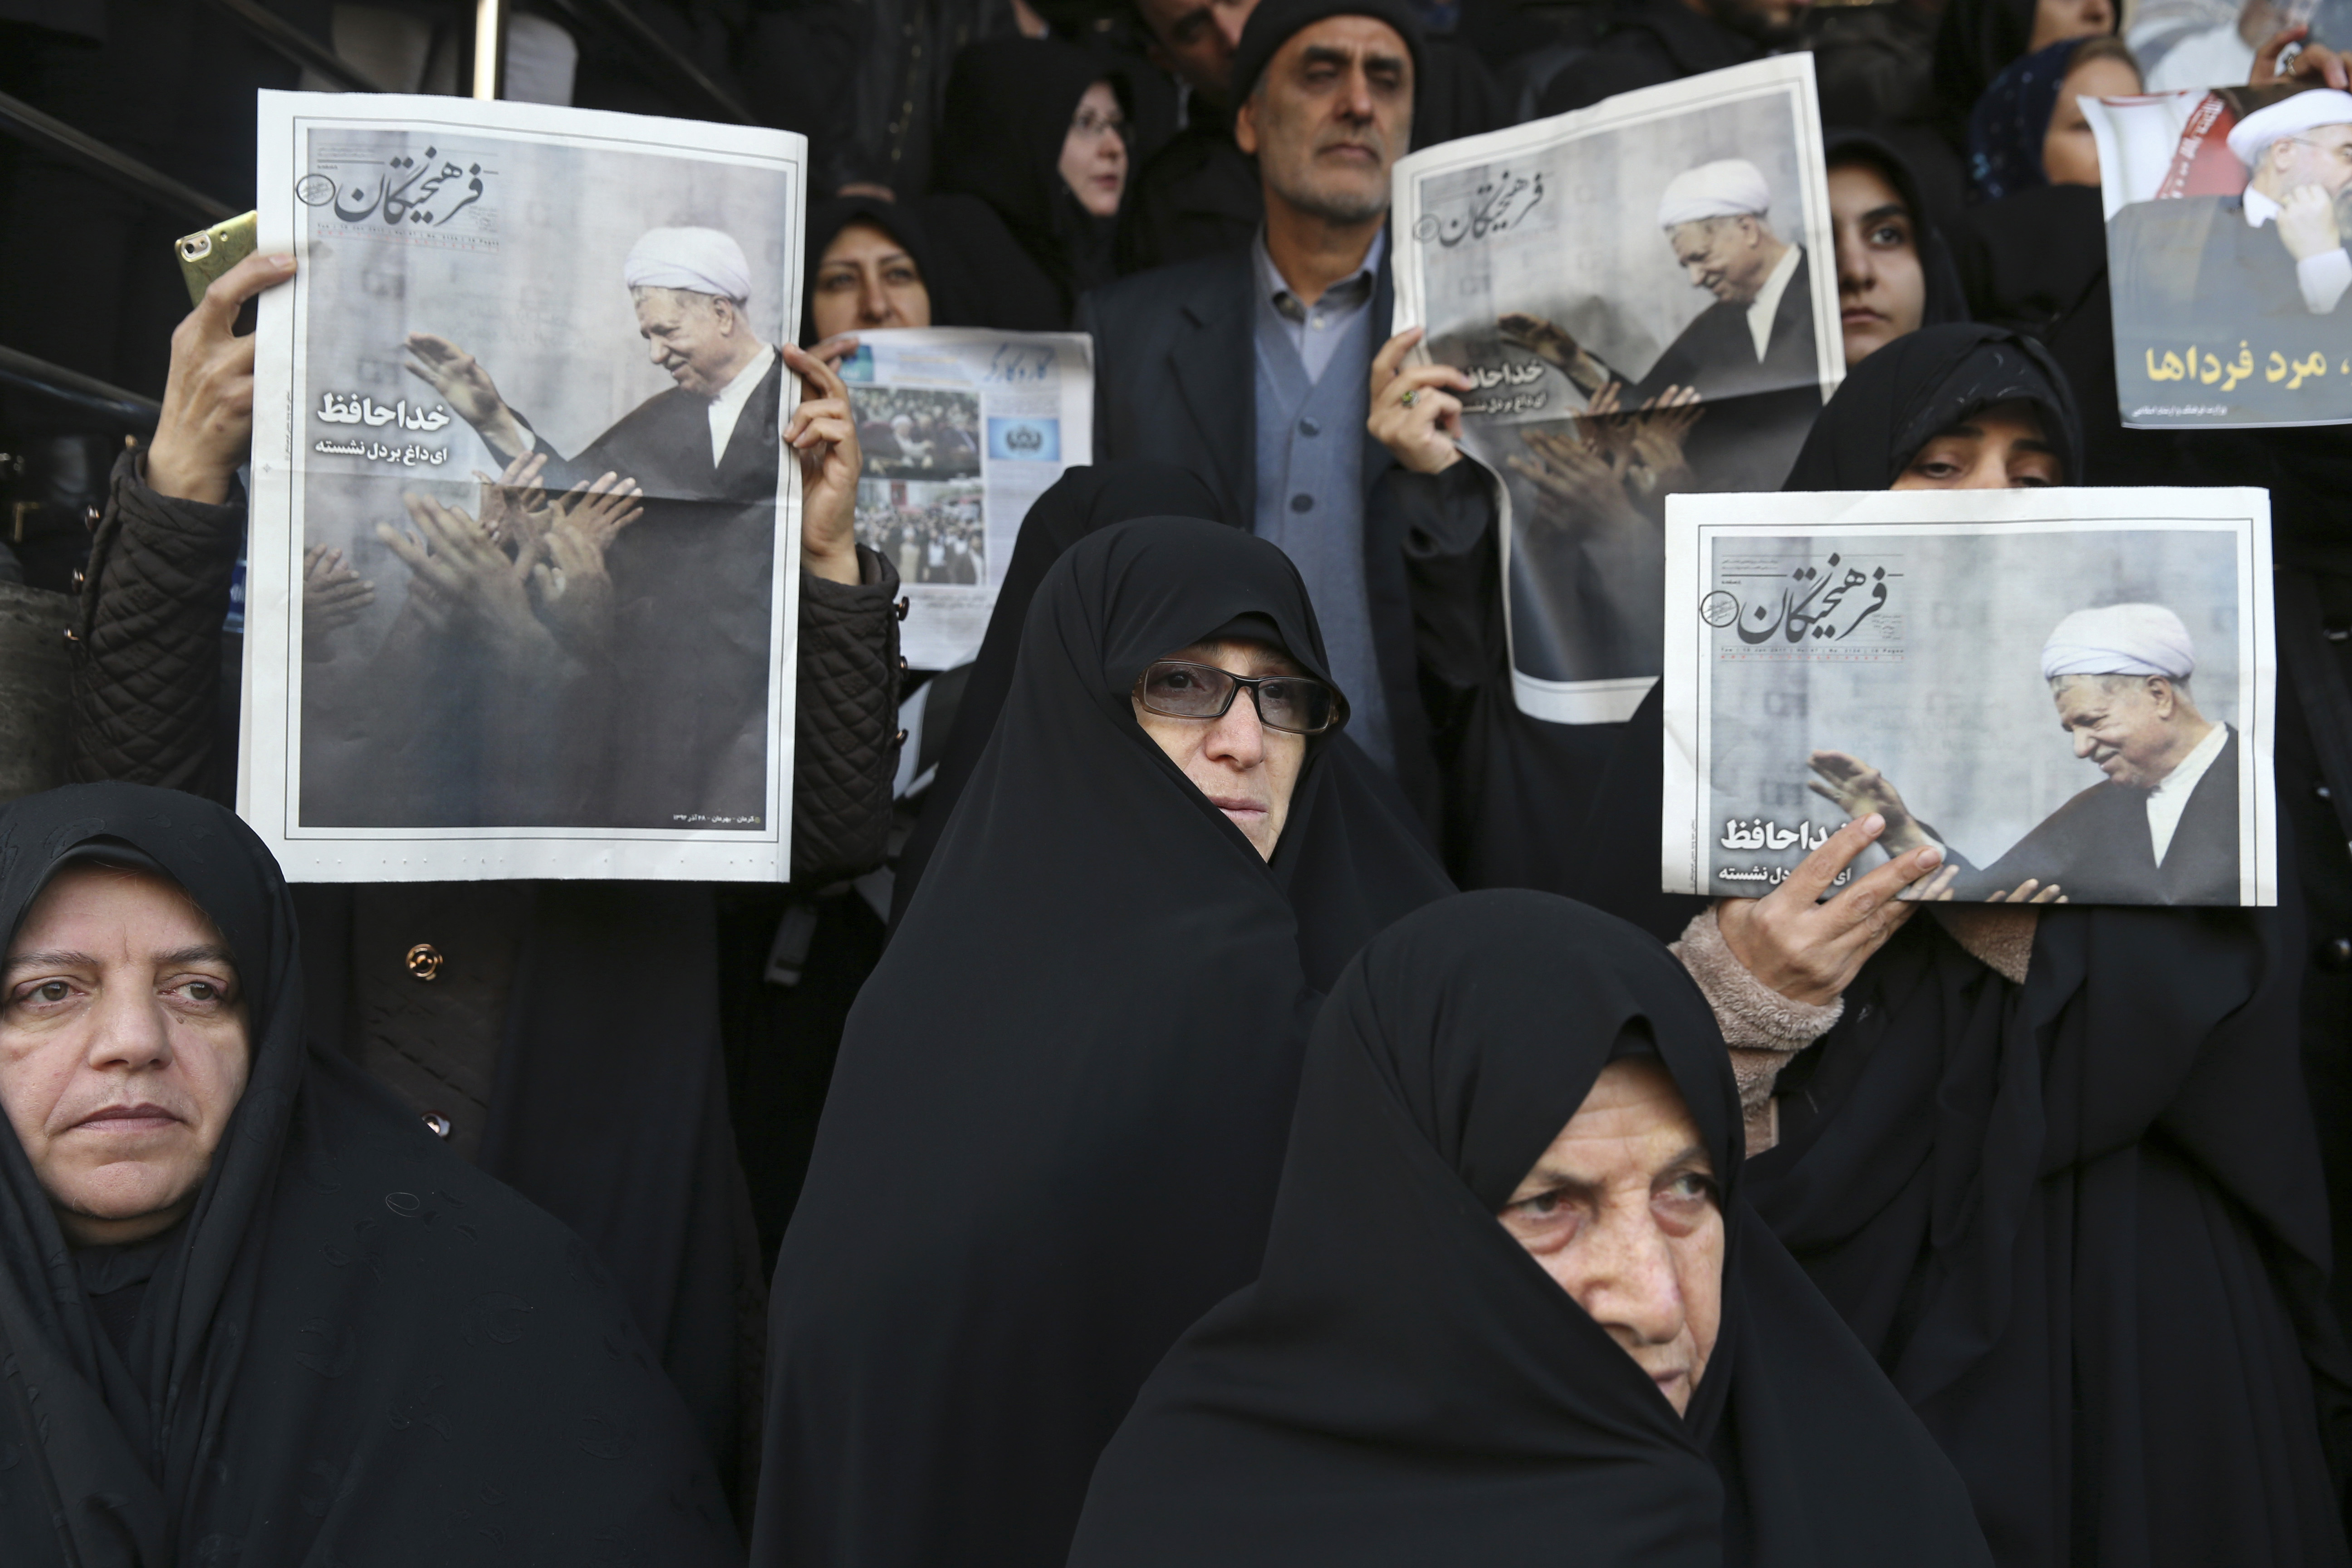 Mourners hold copies of a special edition of Farhikhtegan newspaper showing former Iranian President Akbar Hashemi Rafsanjani during his funeral in Tehran, Iran, Tuesday, Jan. 10, 2017. Hundreds of thousands of mourners have flooded the streets of Tehran, beating their chests and wailing in grief for Rafsanjani, who died over the weekend at the age of 82. The crowds have filled main thoroughfares of the capital as top government and clerical officials held a funeral service at Tehran University. (AP Photo/Vahid Salemi)